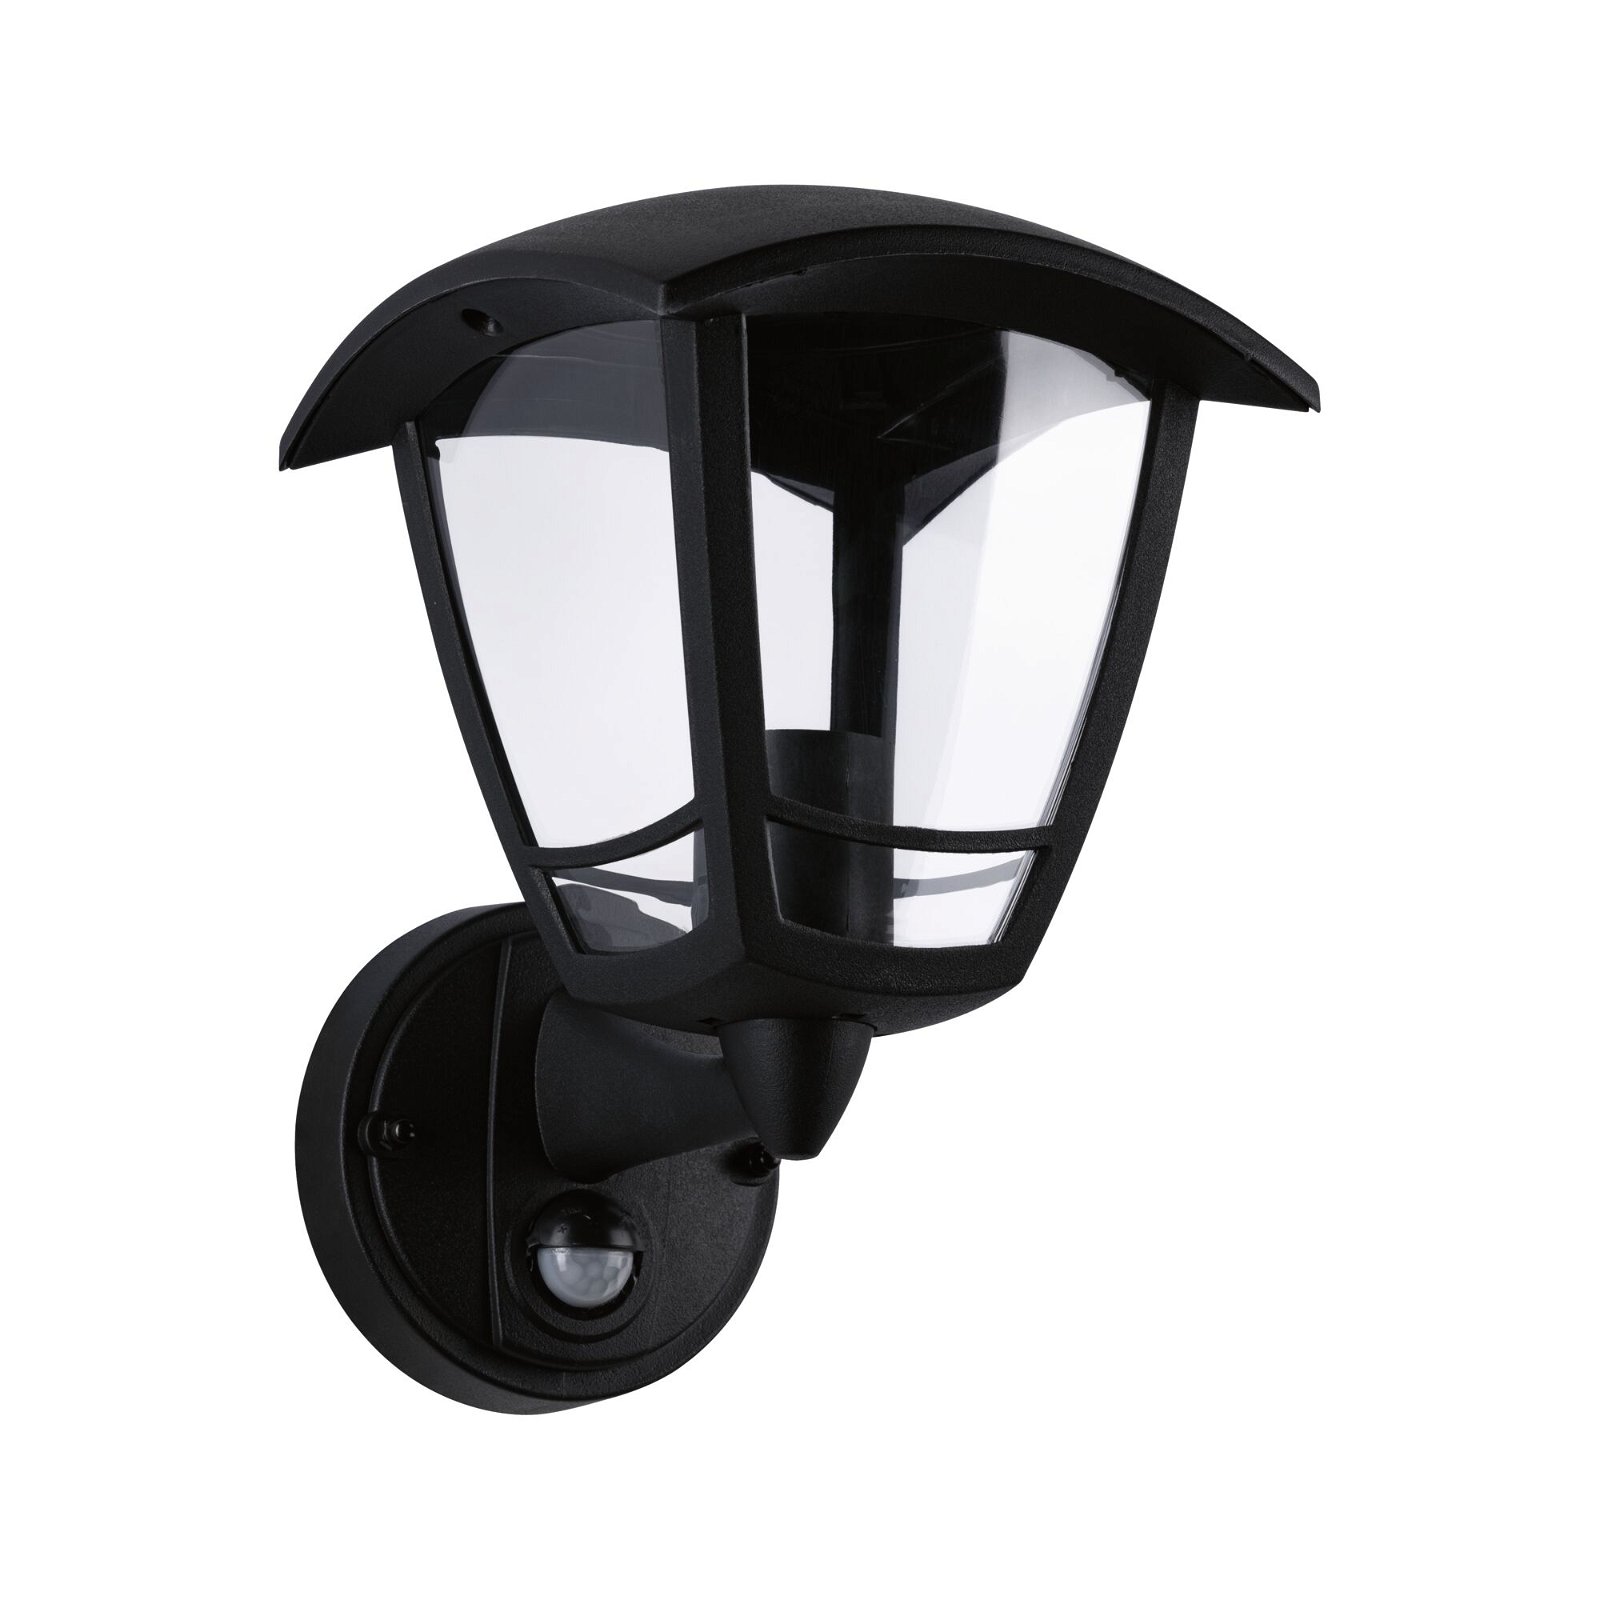 Exterior wall luminaire Classic Curved Motion detector IP44 square 164x180mm max. 12W 230V Black Plastic